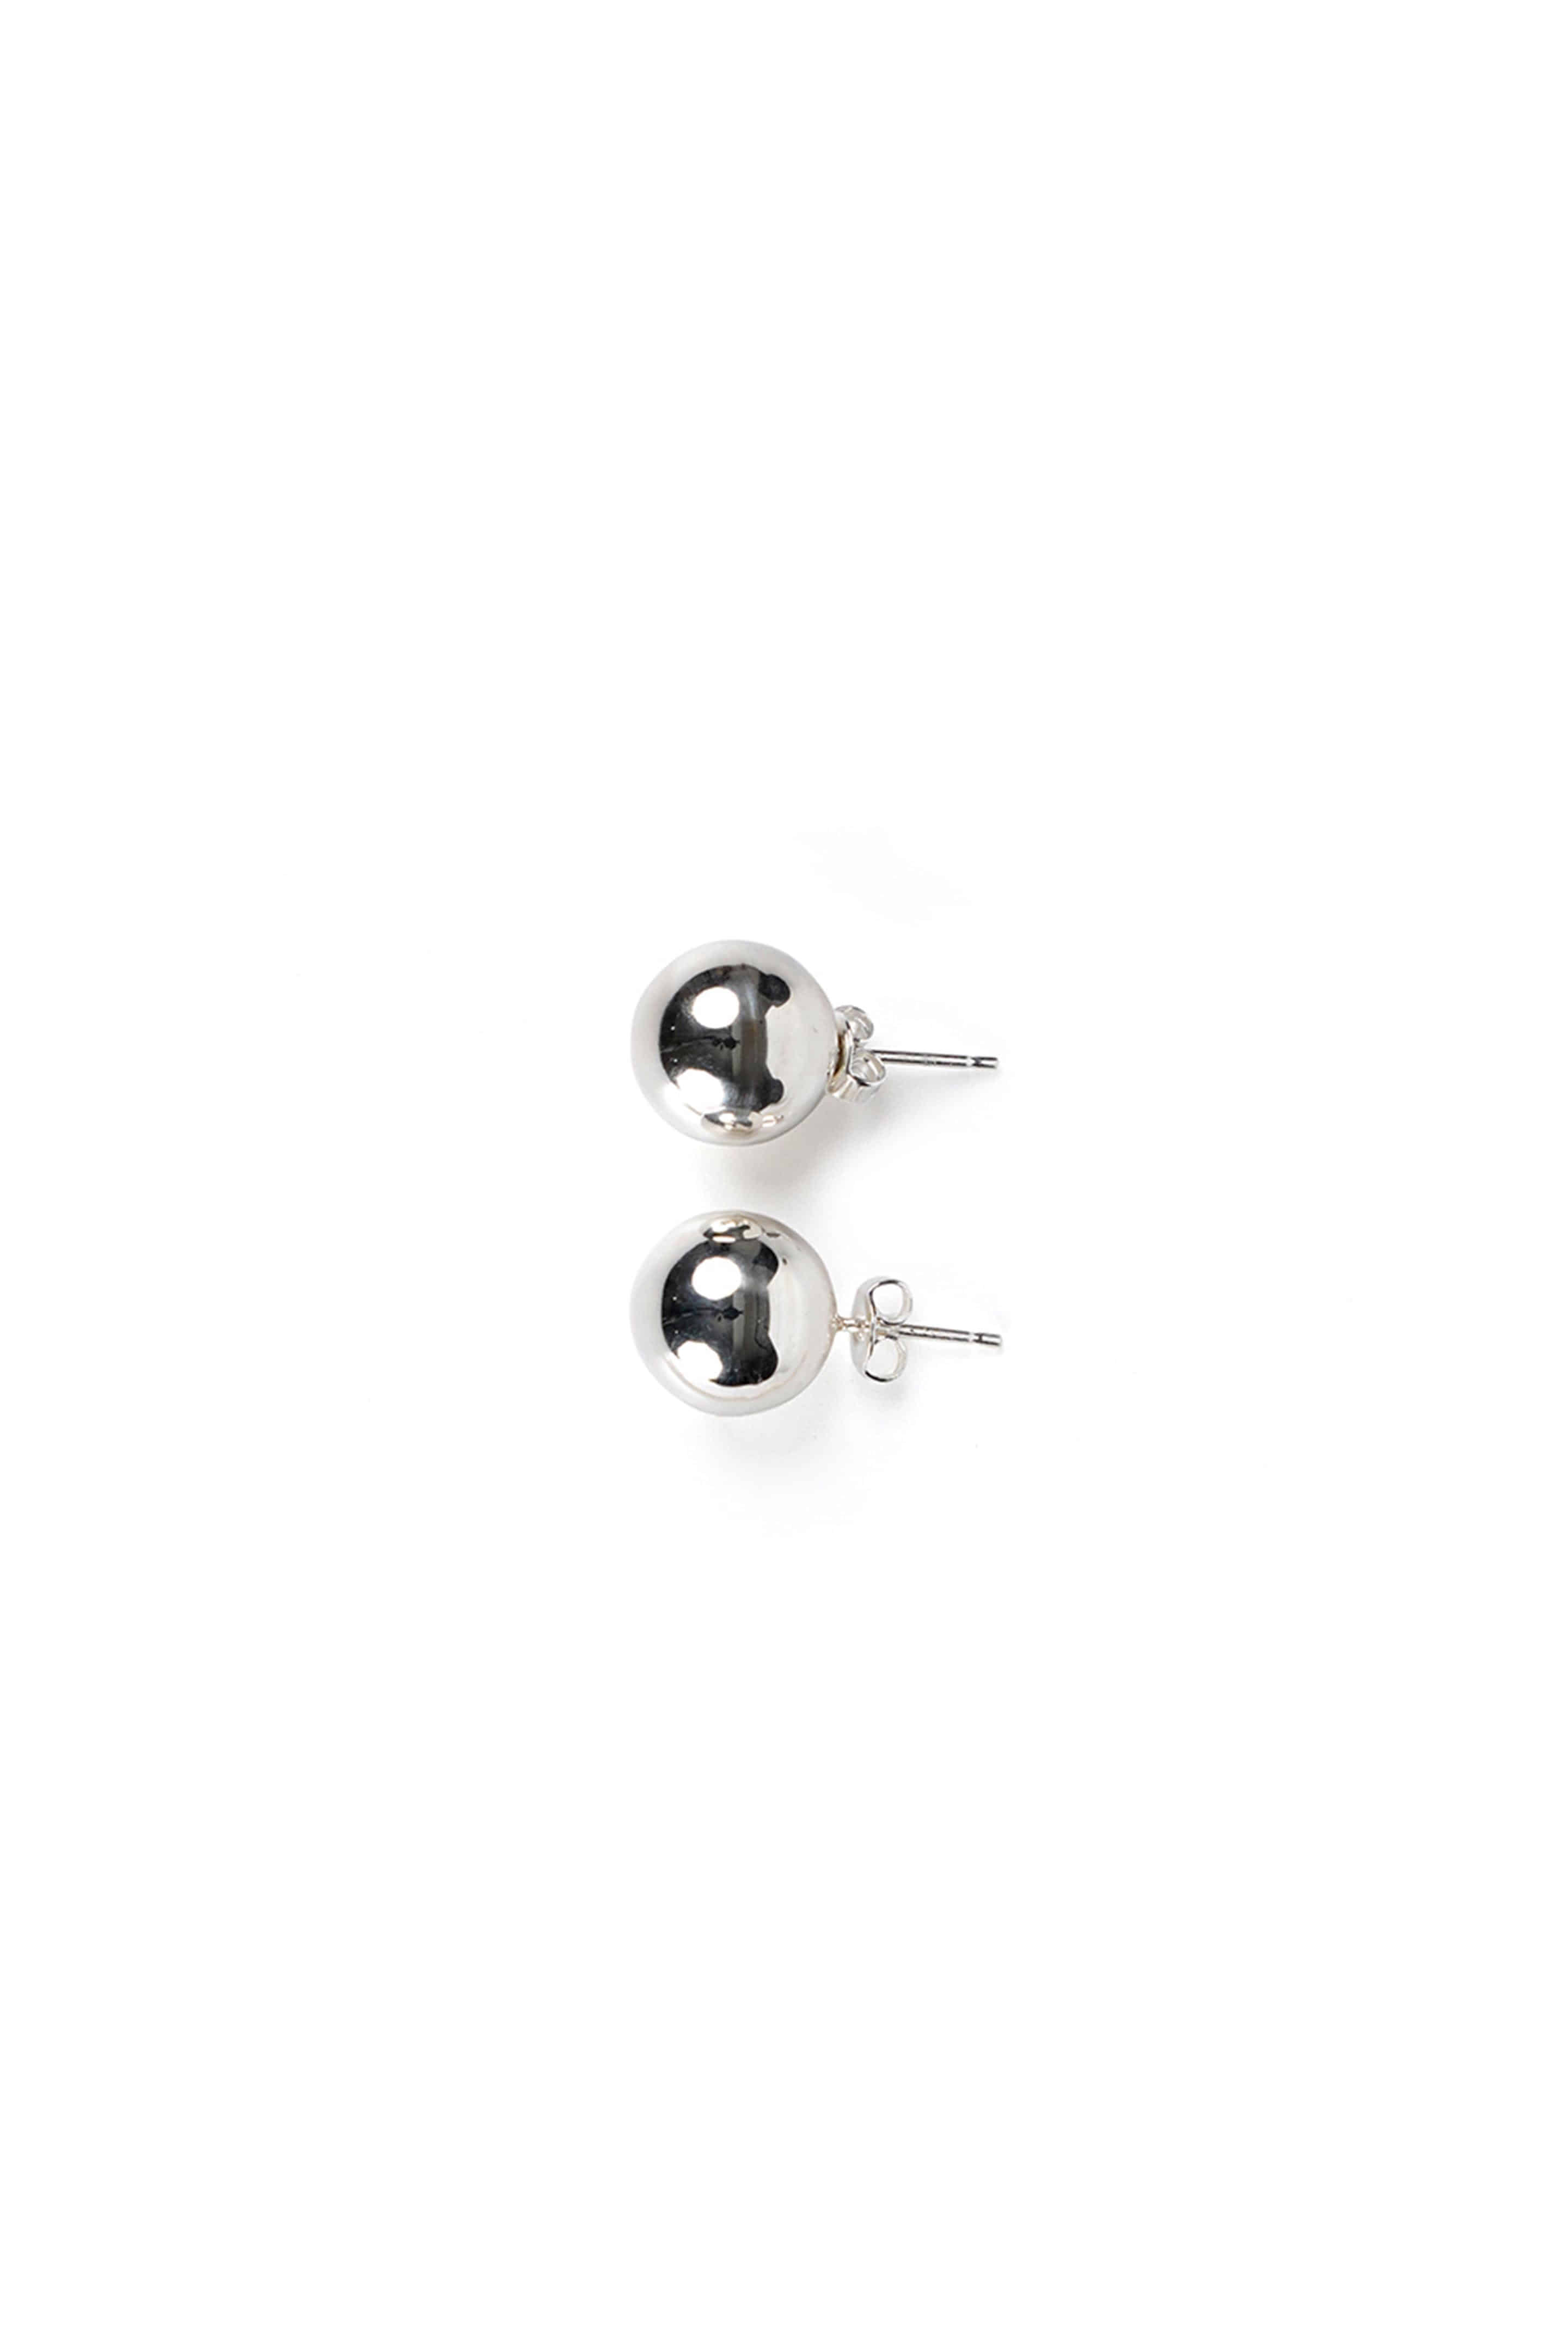 (Exclusive) Minimal Silver Ball Earrings